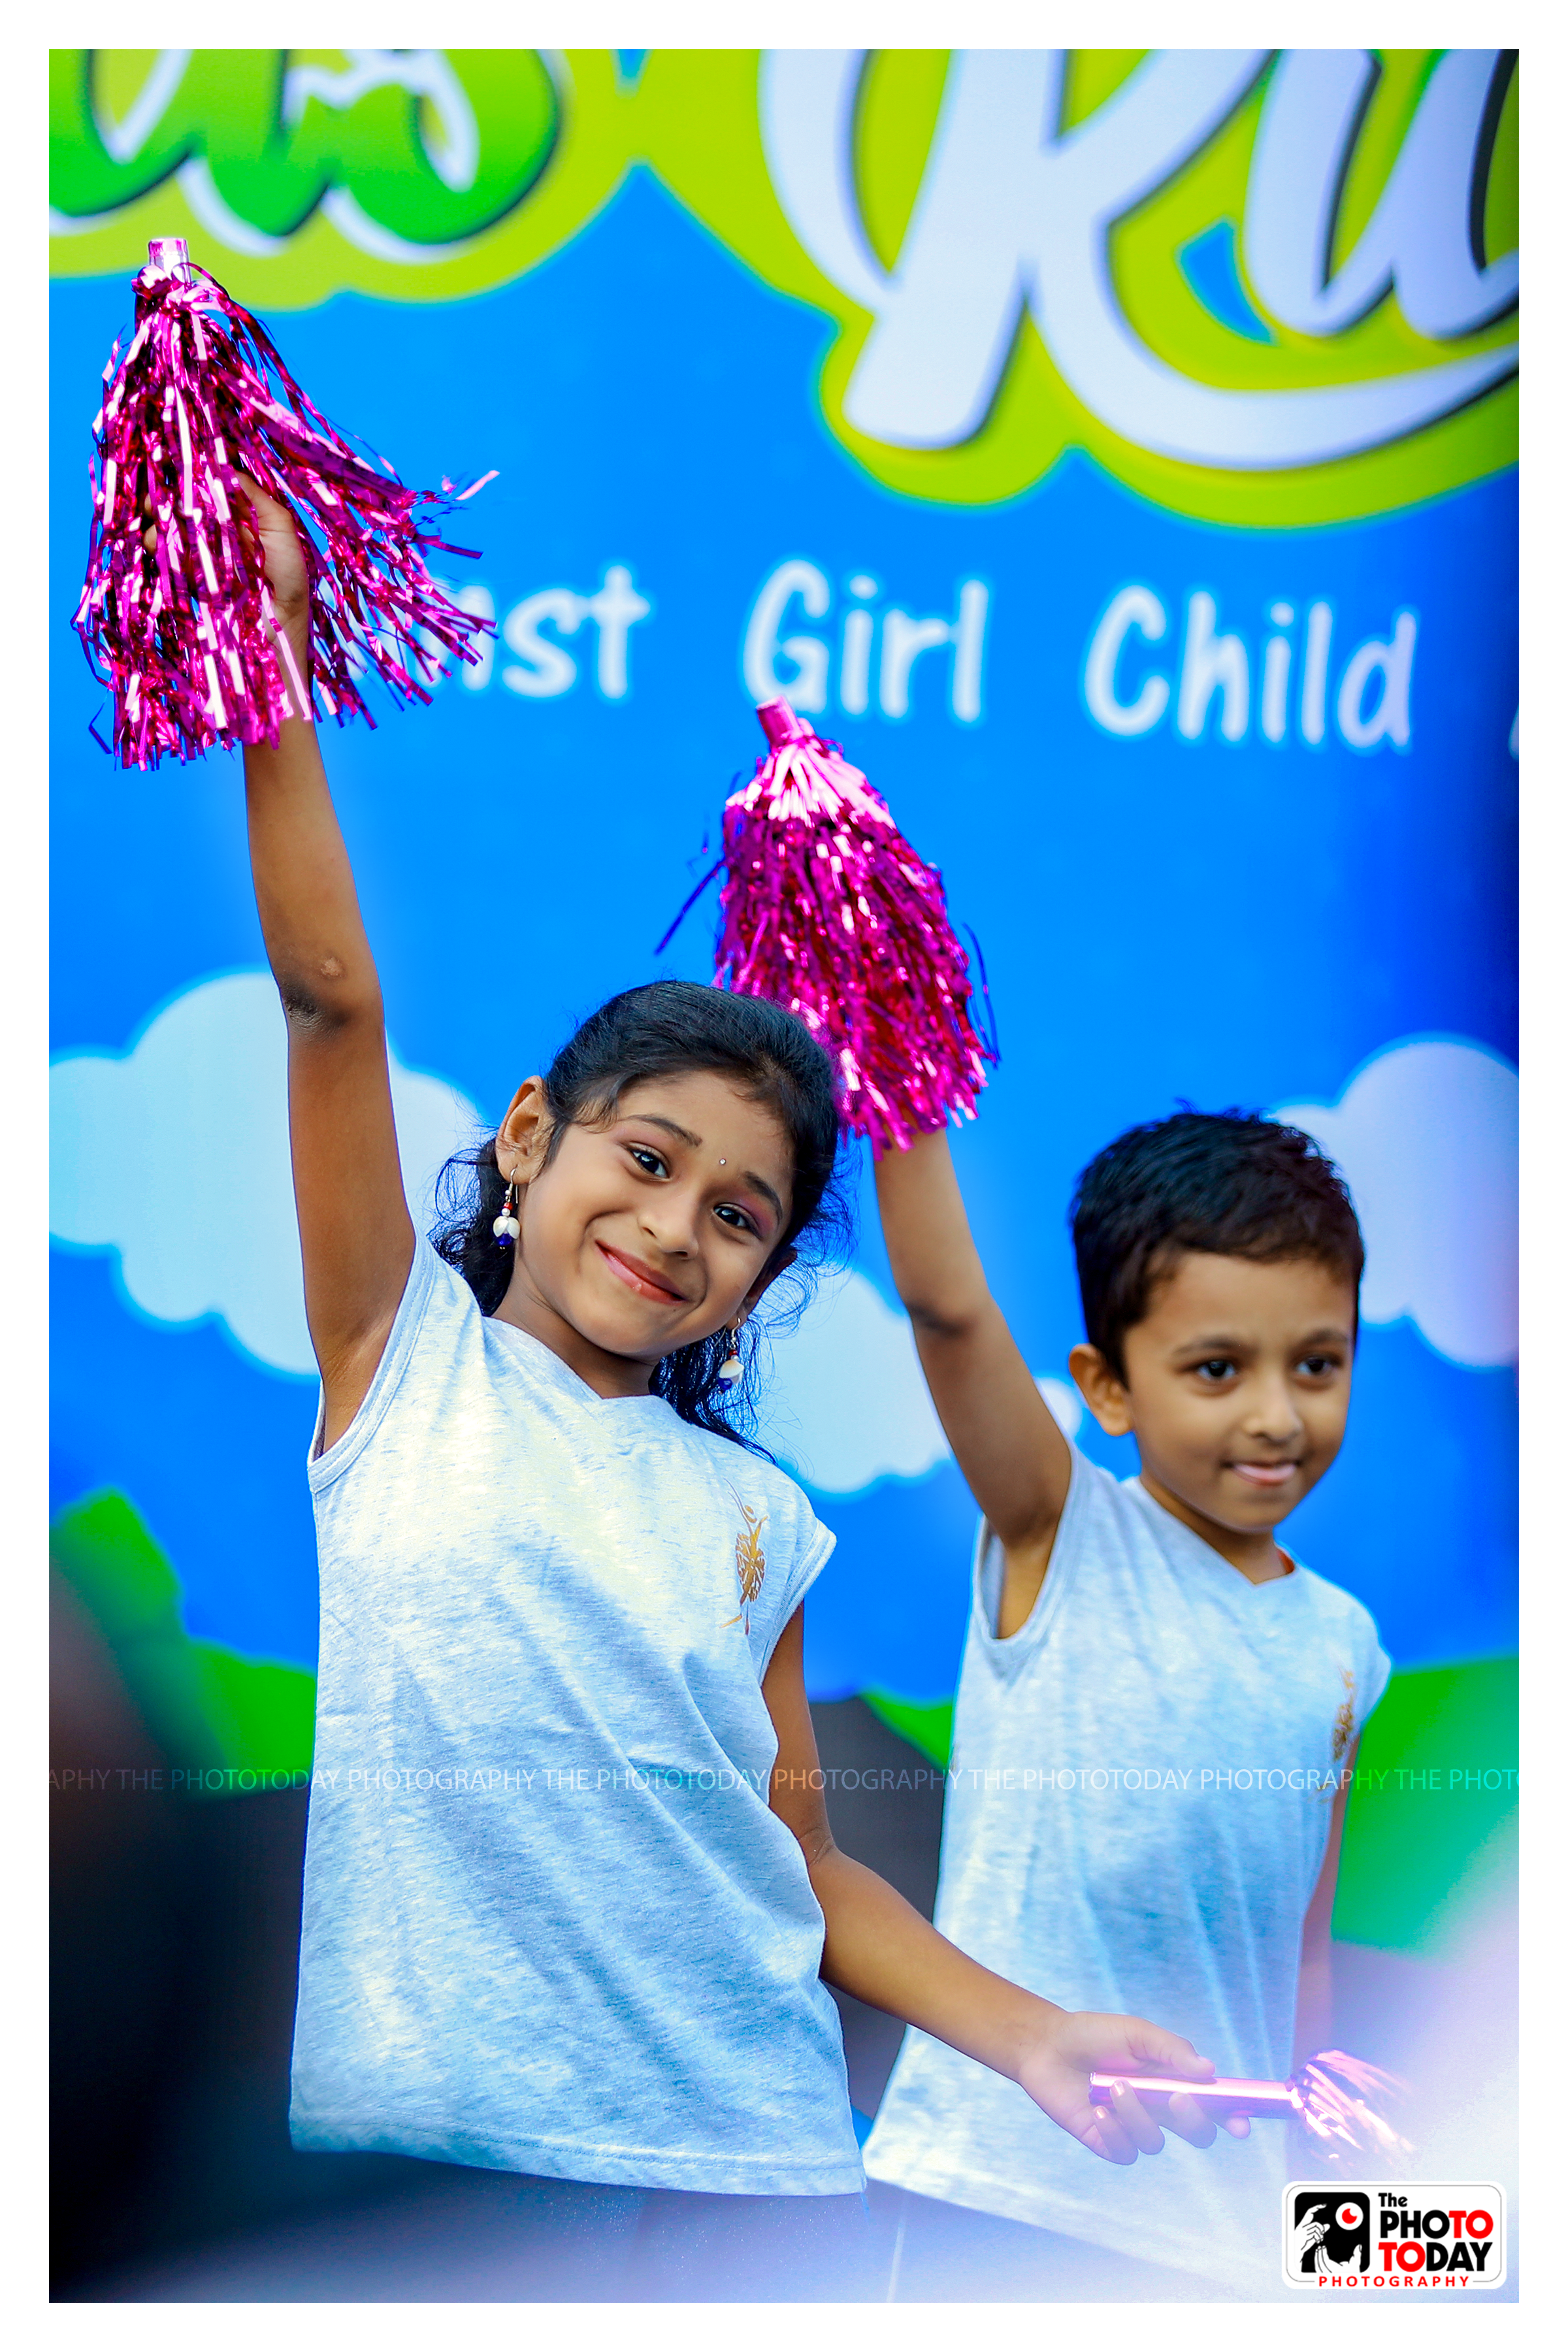 "KIDS RUN" An event for family & kids, for a good social cause "A run against girl child abuse"